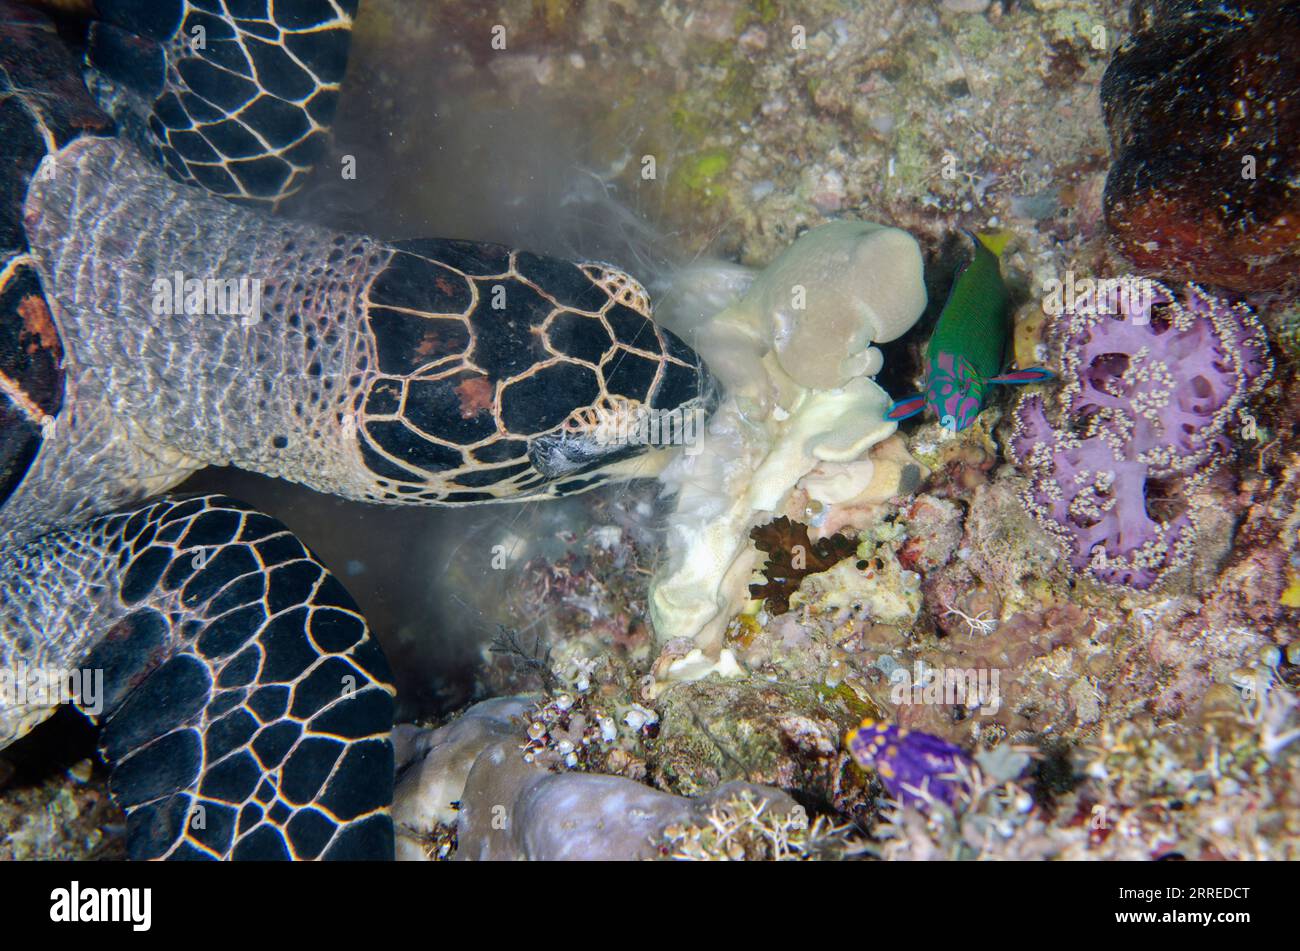 Hawksbill Turtle, Eretmochelys imbricata, classified as Critically Endangered, eating soft coral with with Moon Wrasse, Thalassoma lunare, Boo Window Stock Photo